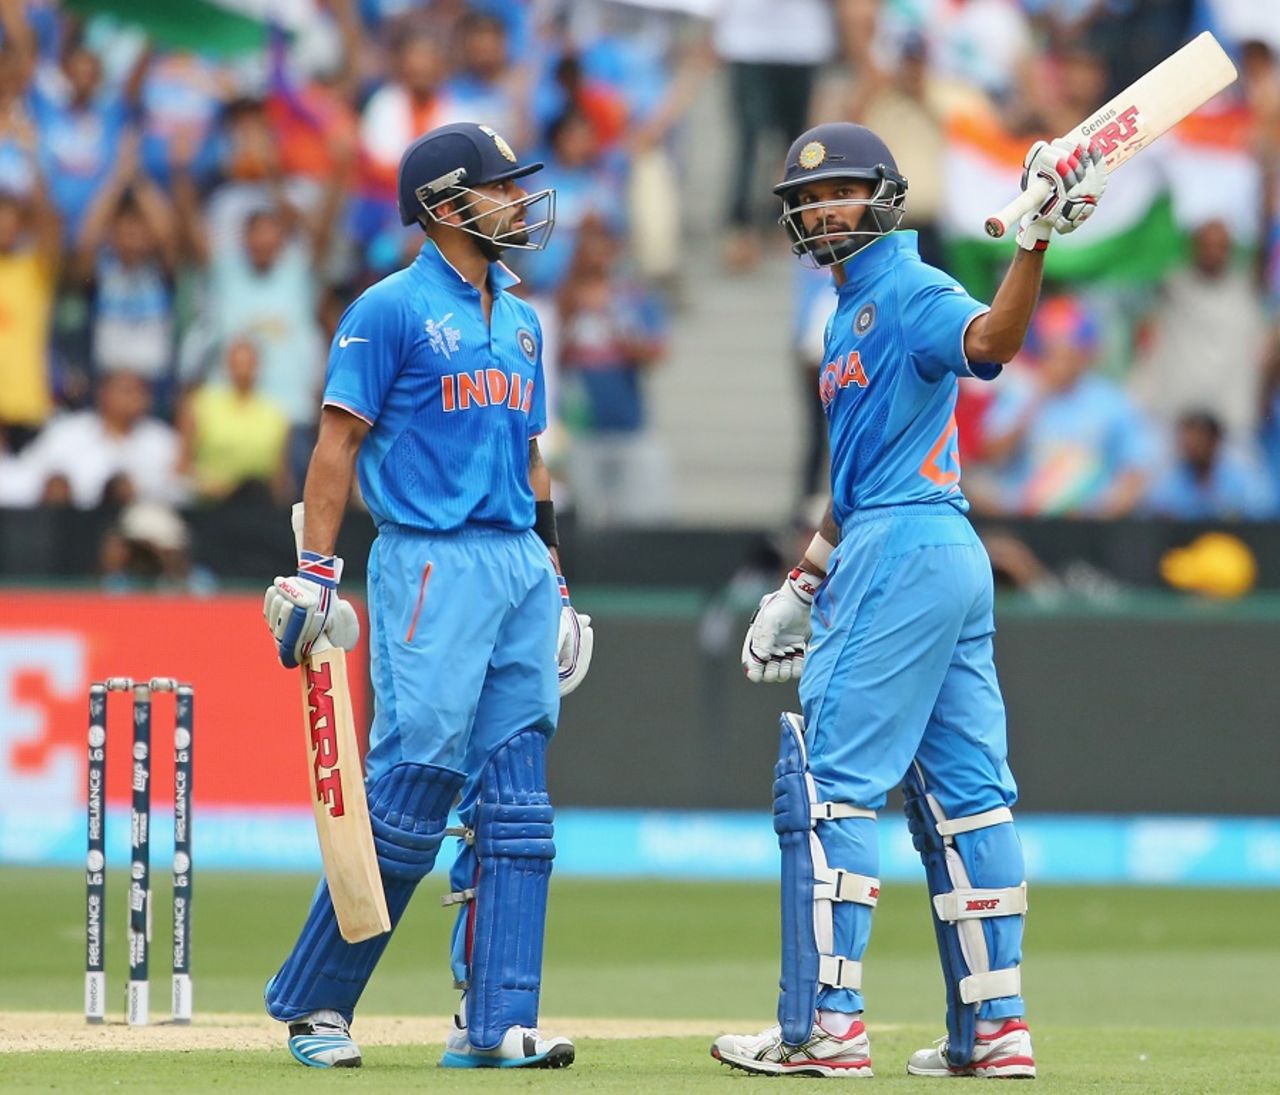 Shikhar Dhawan raises his bat after reaching a fifty as Virat Kohli looks on, India v South Africa, World Cup 2015, Group B, Melbourne, February 22, 2015